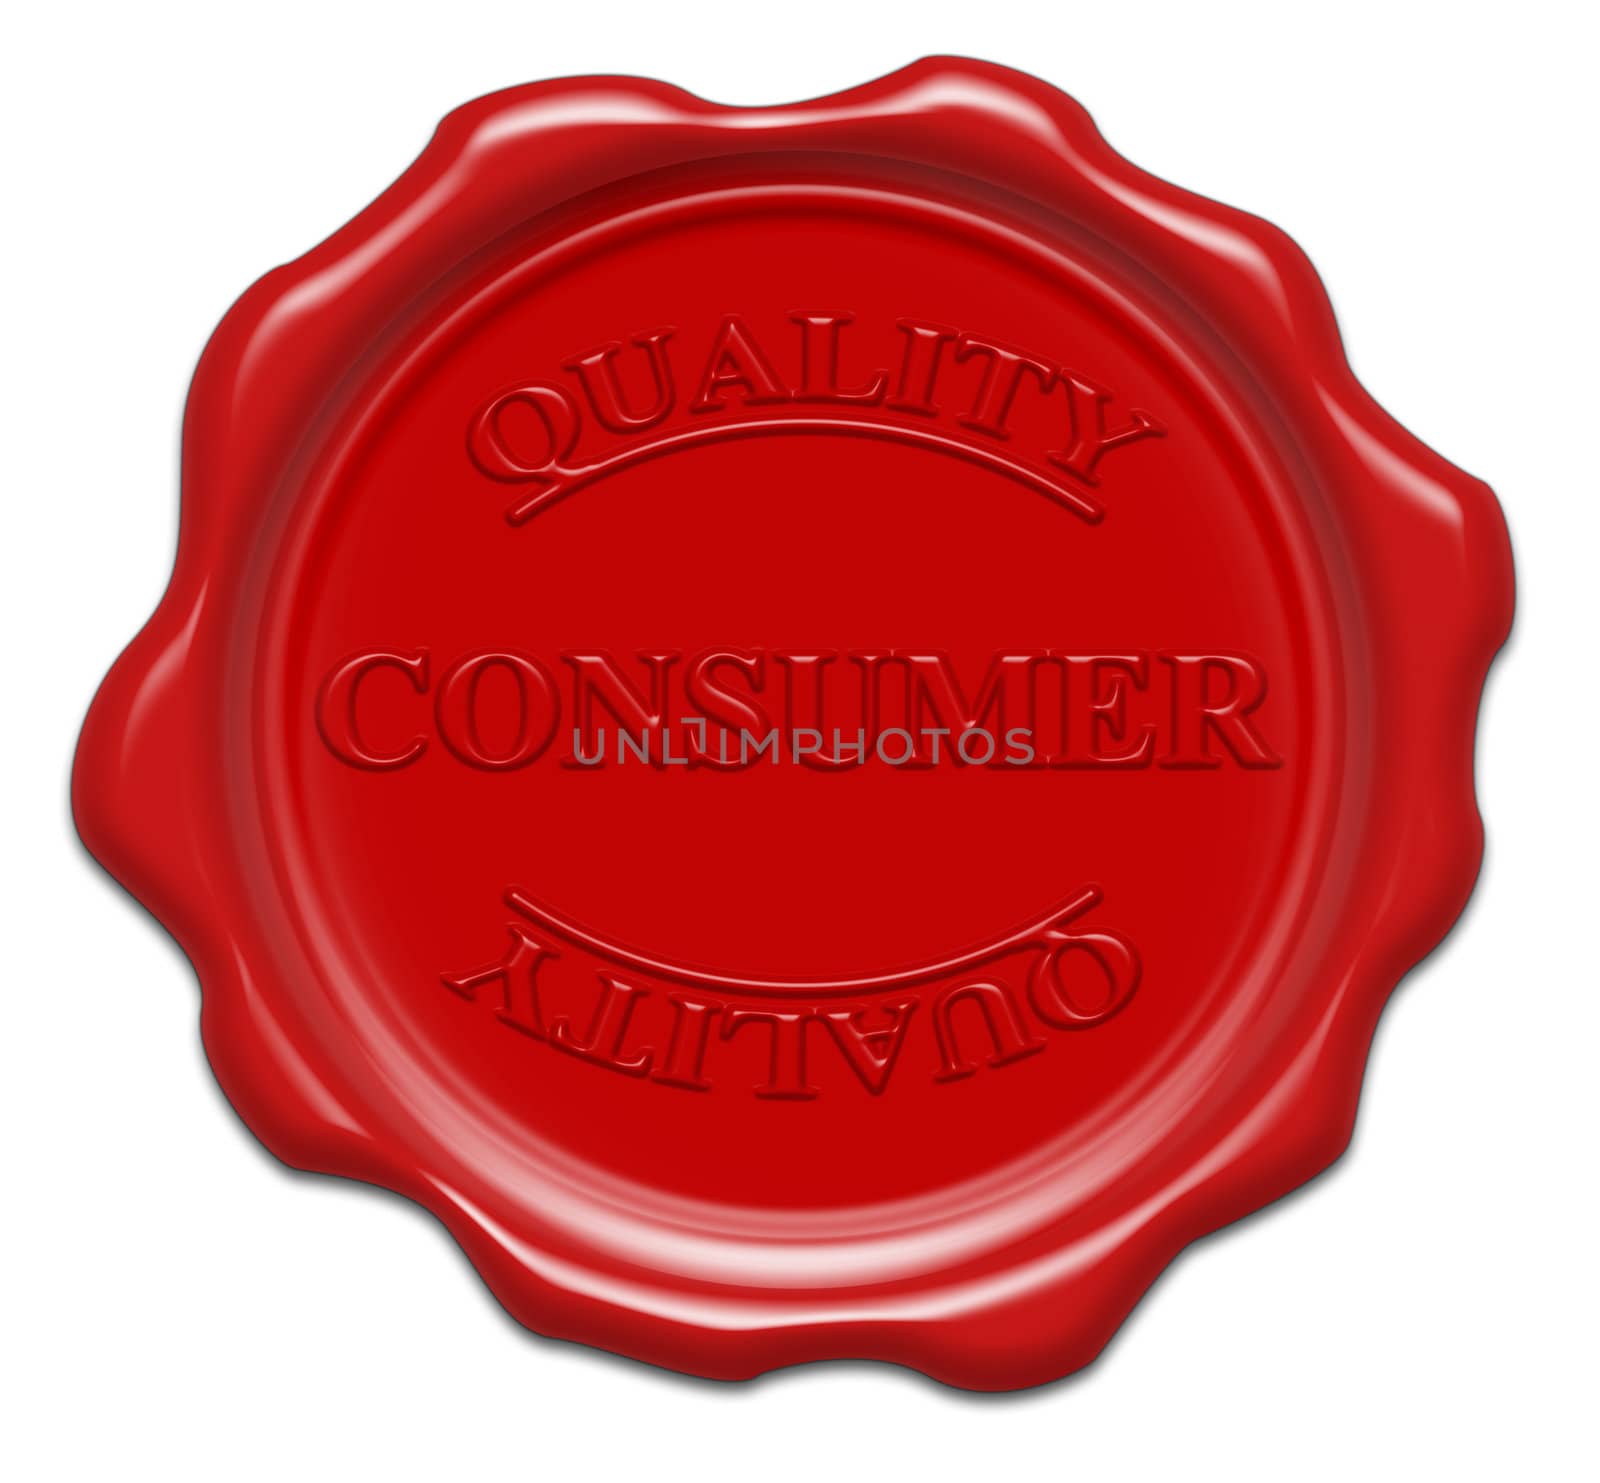 quality consumer - illustration red wax seal isolated on white background with word : consumer